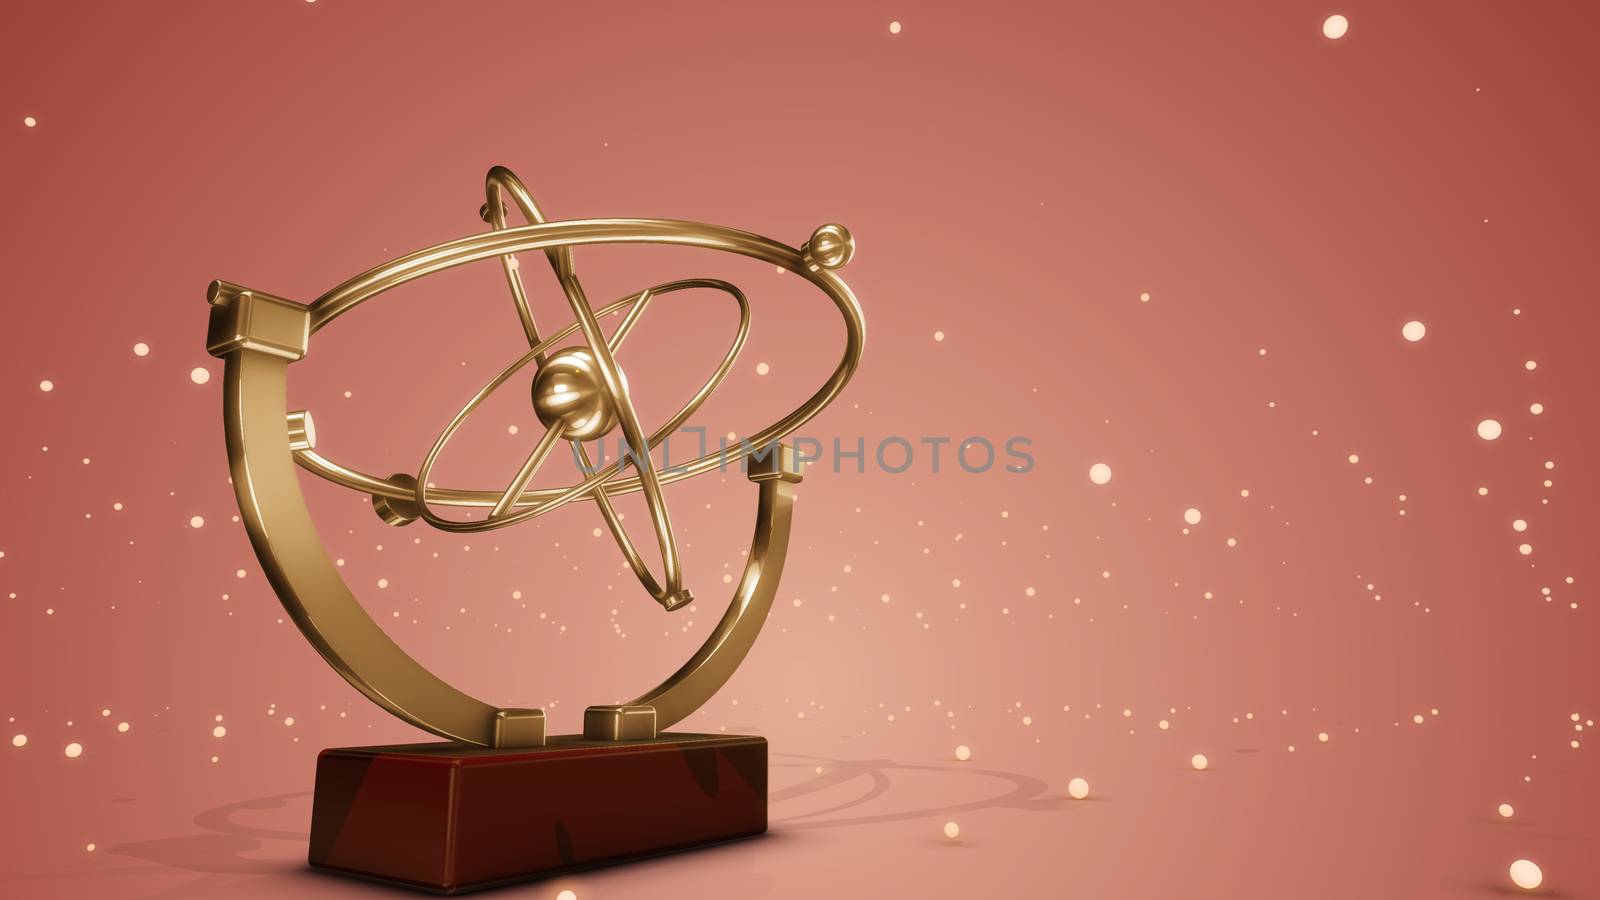 An optical art 3d illustration of a golden pendulum swinging in three spheres back and forth with shimmering stars moving in the light brown background. It forms the spirit of future.